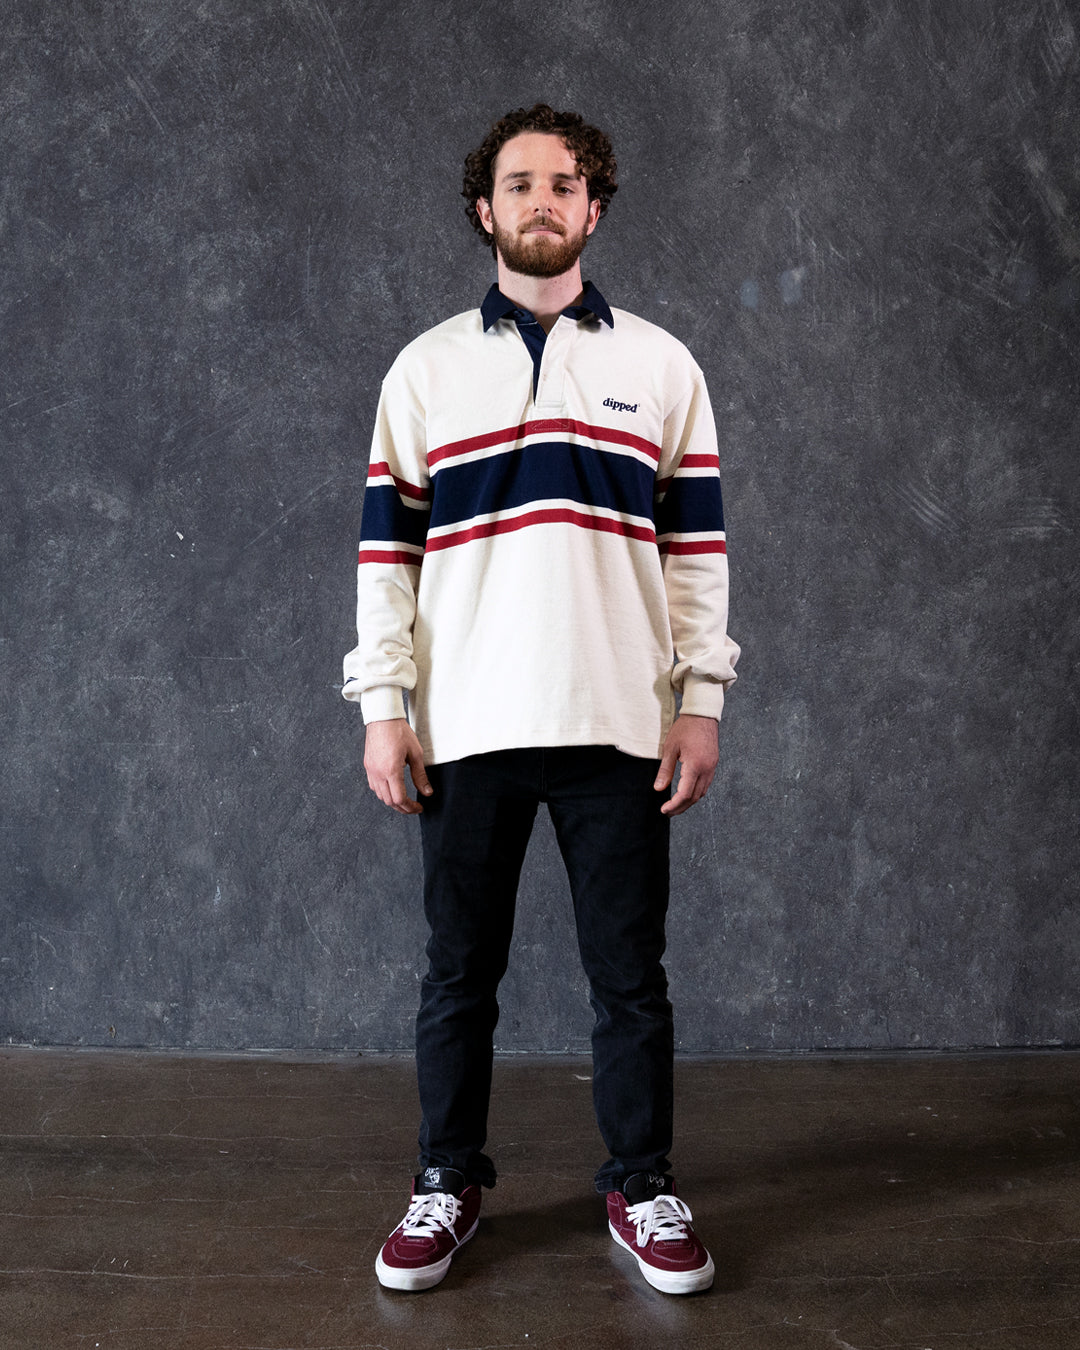 DIPPED Ivory Rugby Shirt